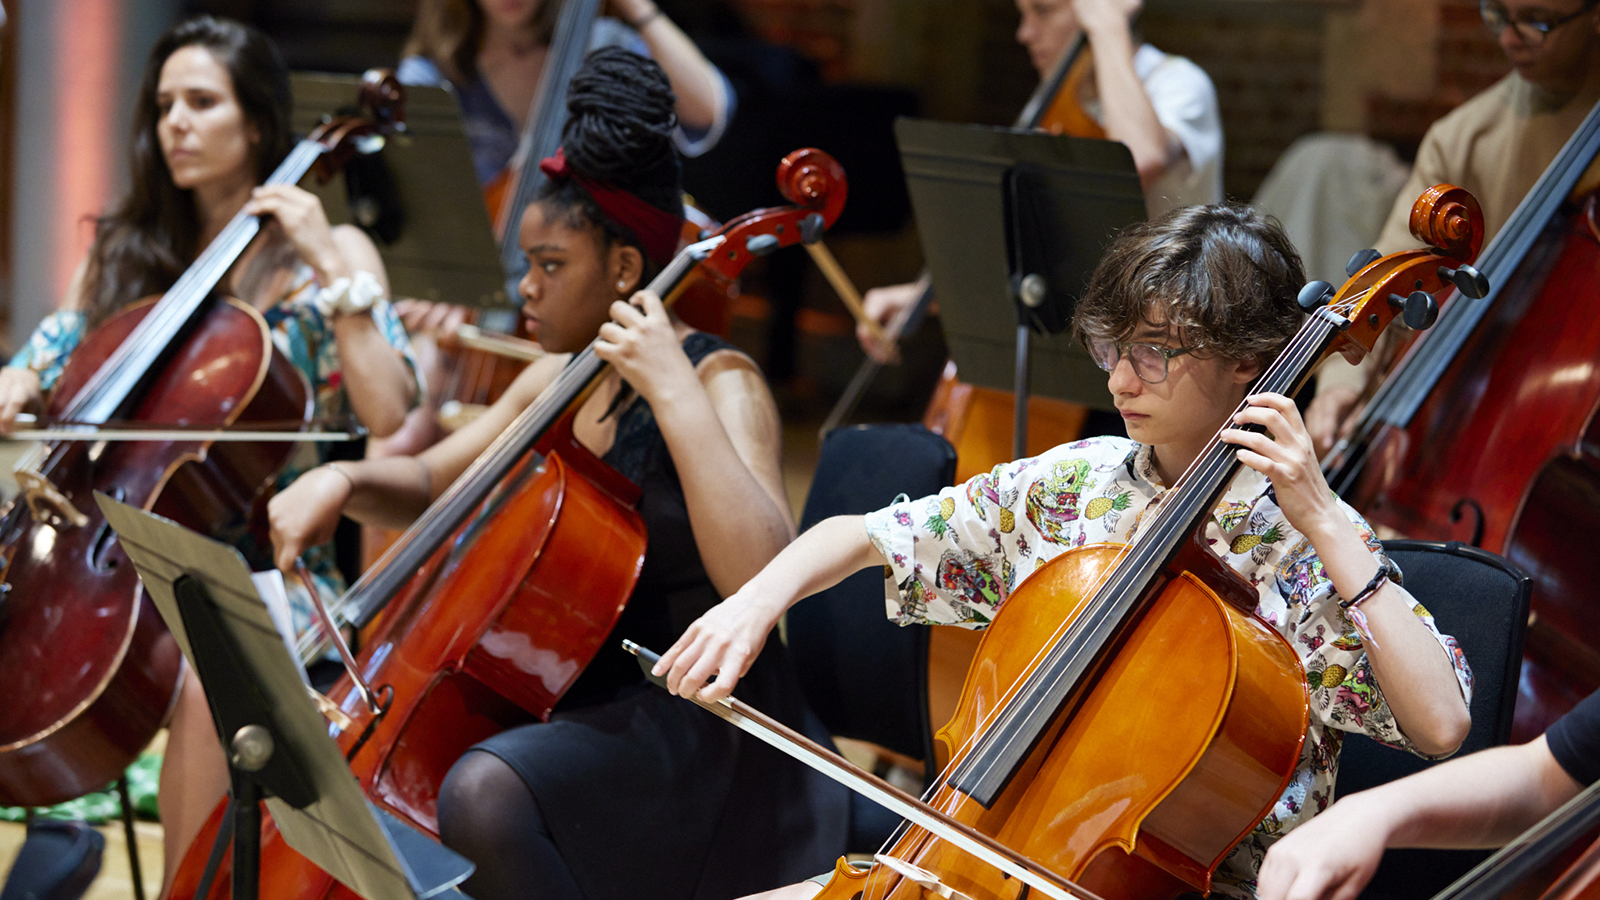 Two rows of young people seated in a room, playing cellos.